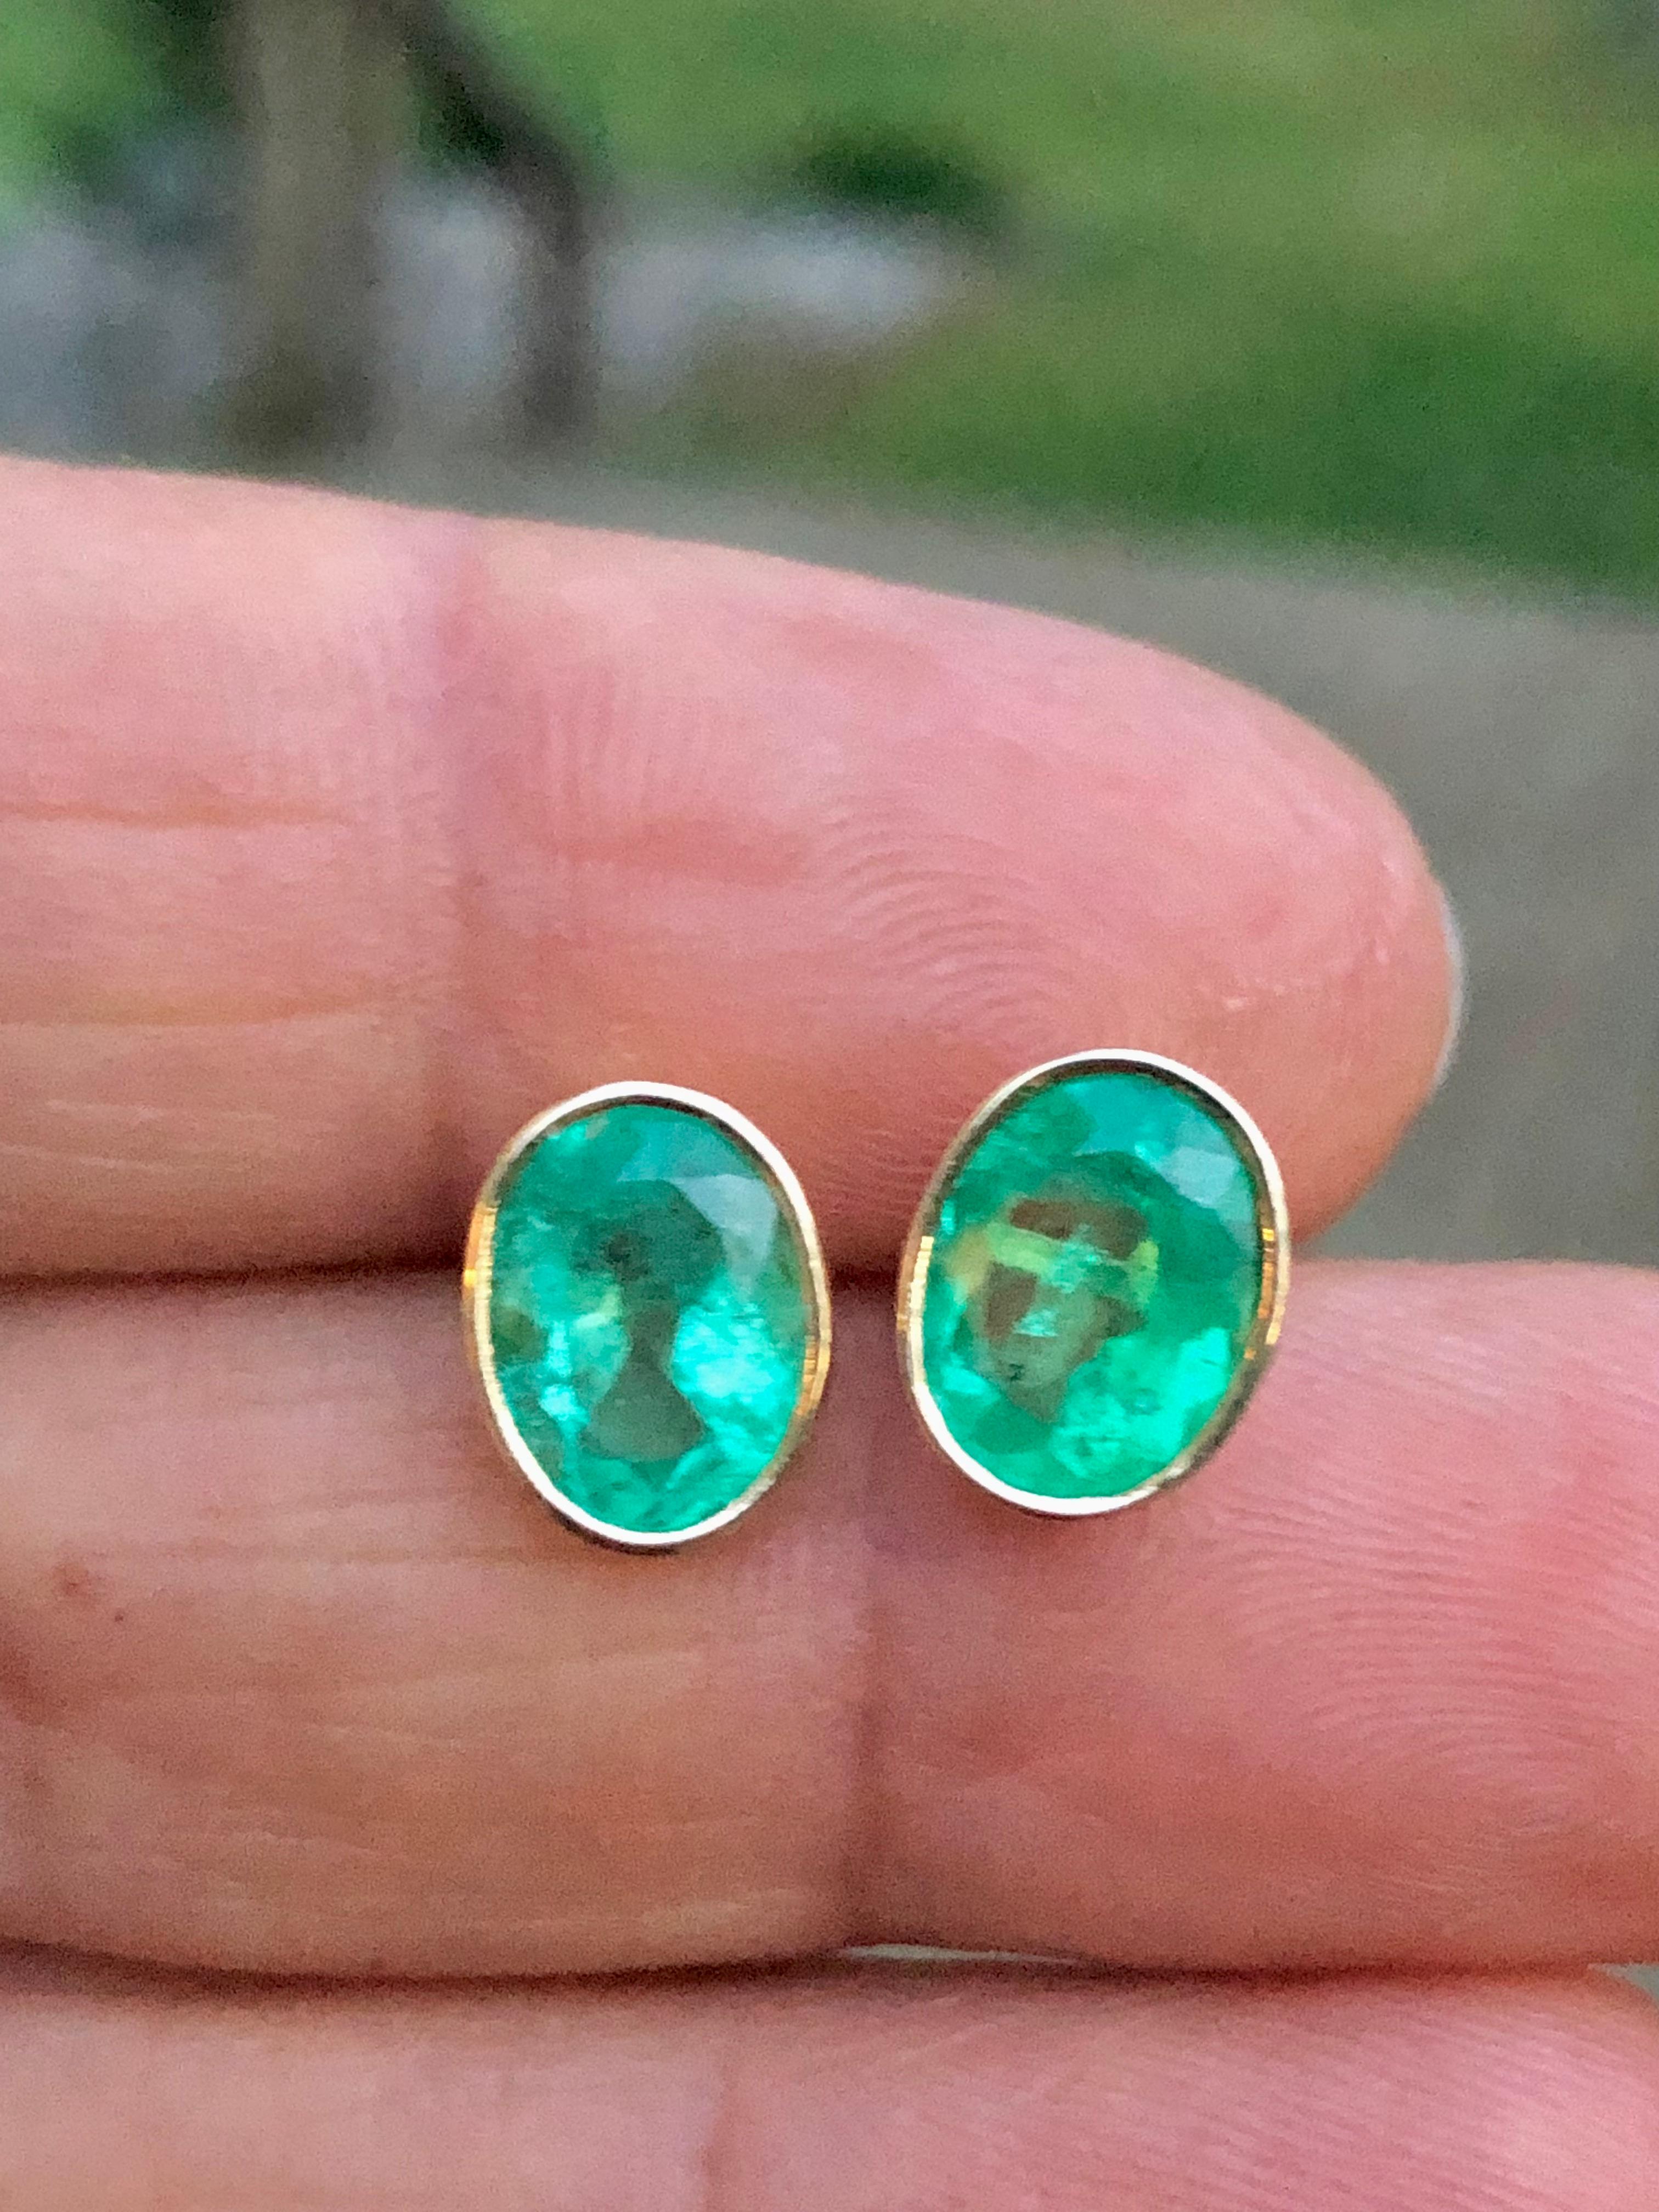 3.63 Carat Natural Colombian Emerald Oval Stud Earrings 18k Yellow Gold
Primary Stones: 100% Natural Colombian Emeralds
Shape or Cut : Oval Cut
Average Color/Clarity : Medium Green/ Clarity, VS-SI 
Total Weight Emeralds: 3.63 Carats 
Earrings